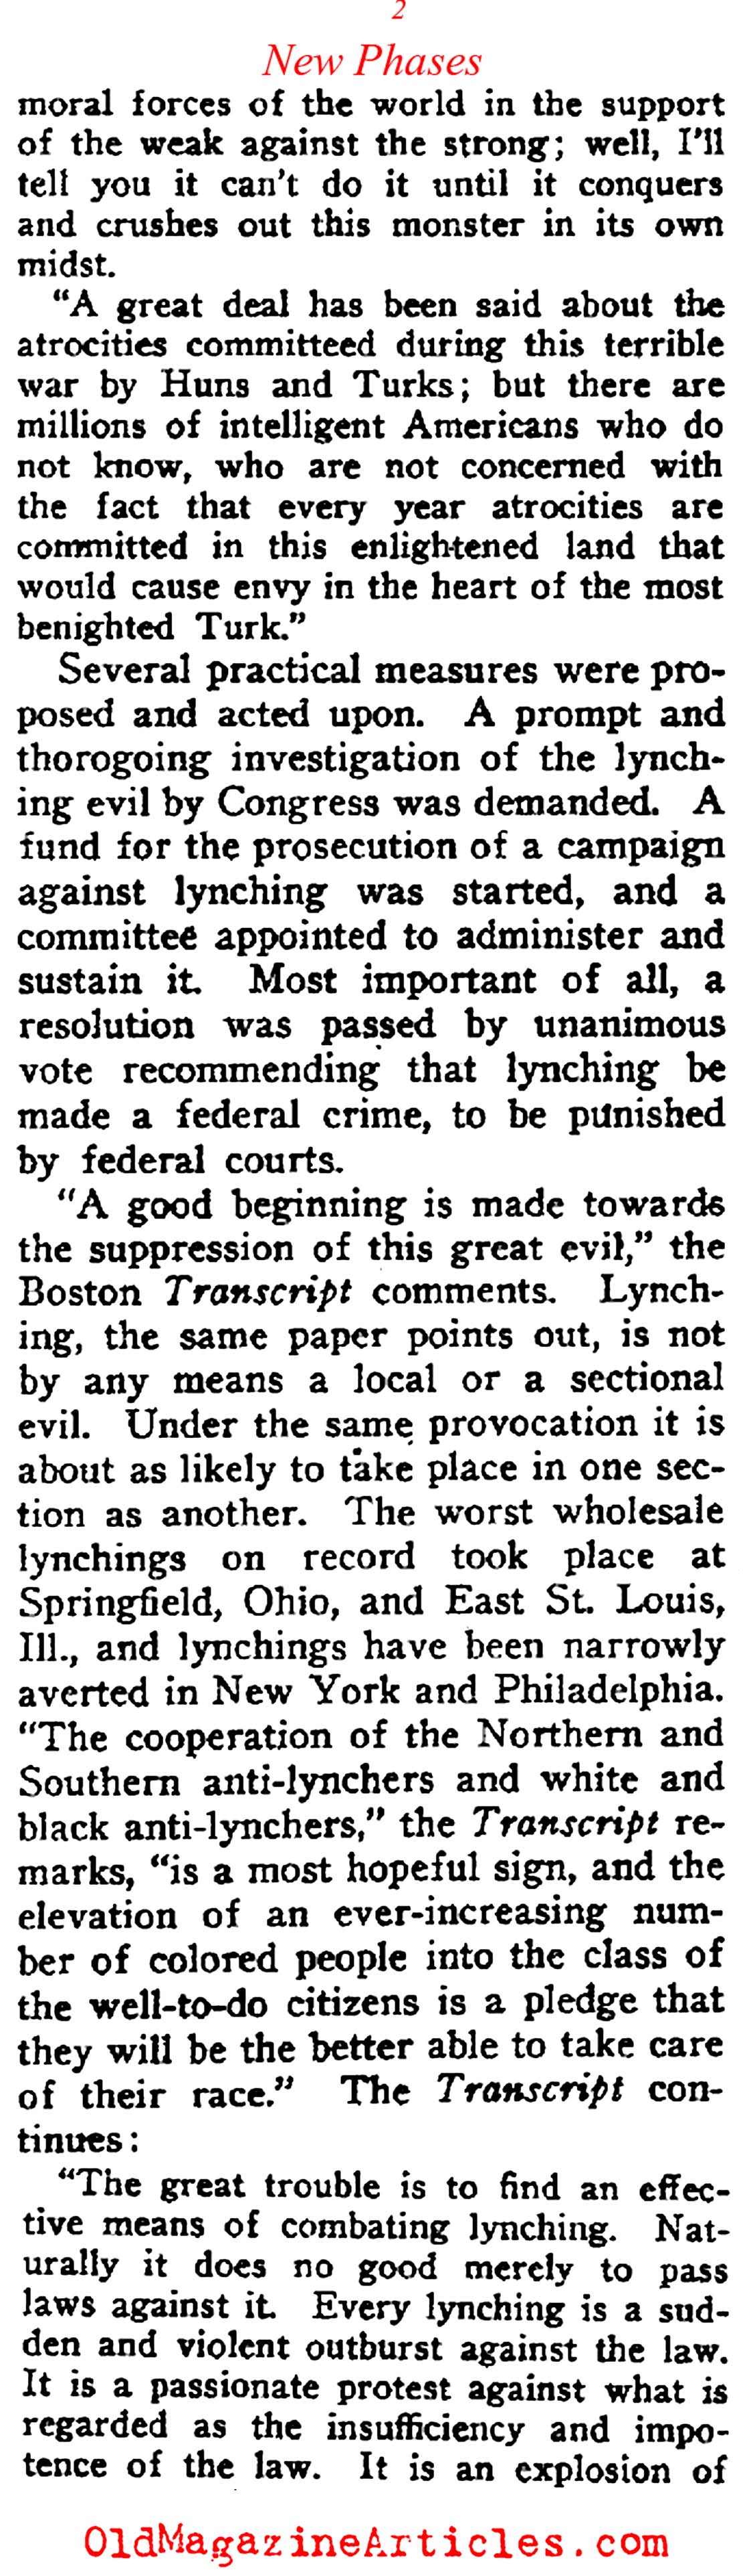 The Fight Against Lynching (Current Opinion, 1919)